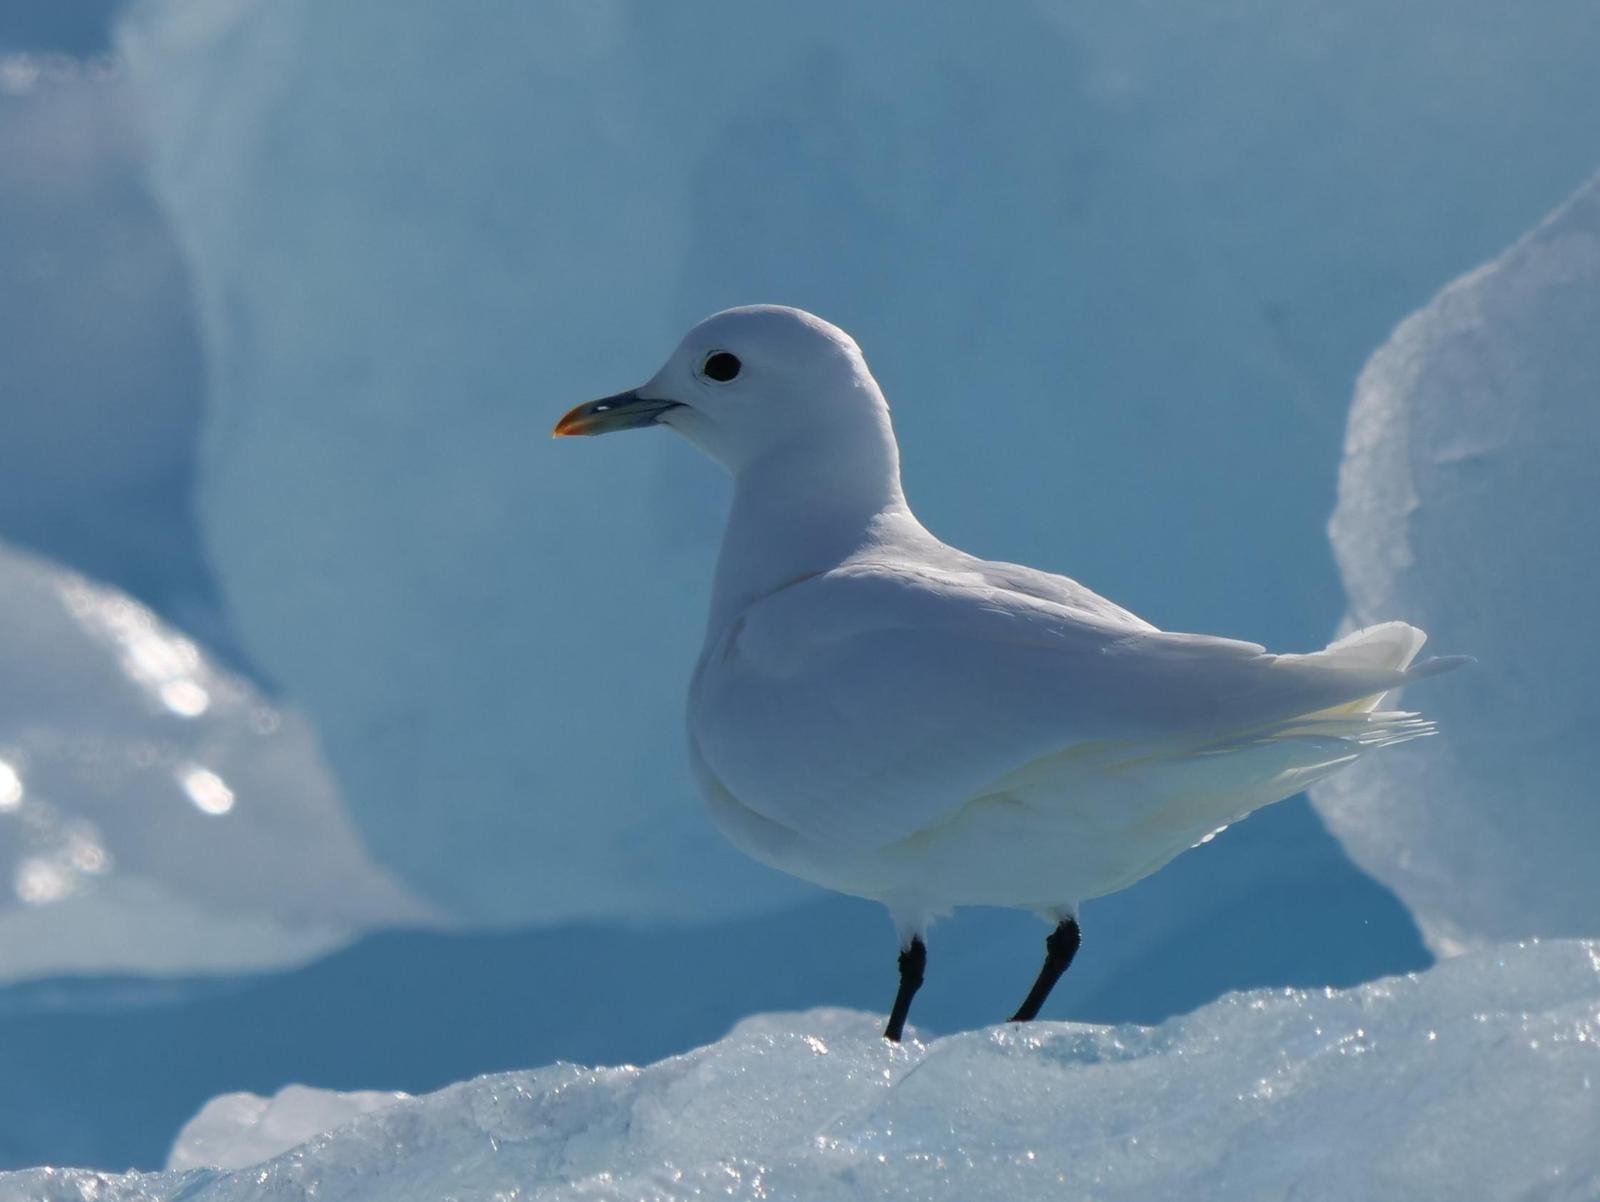 Ivory Gull Photo by Peter Lowe